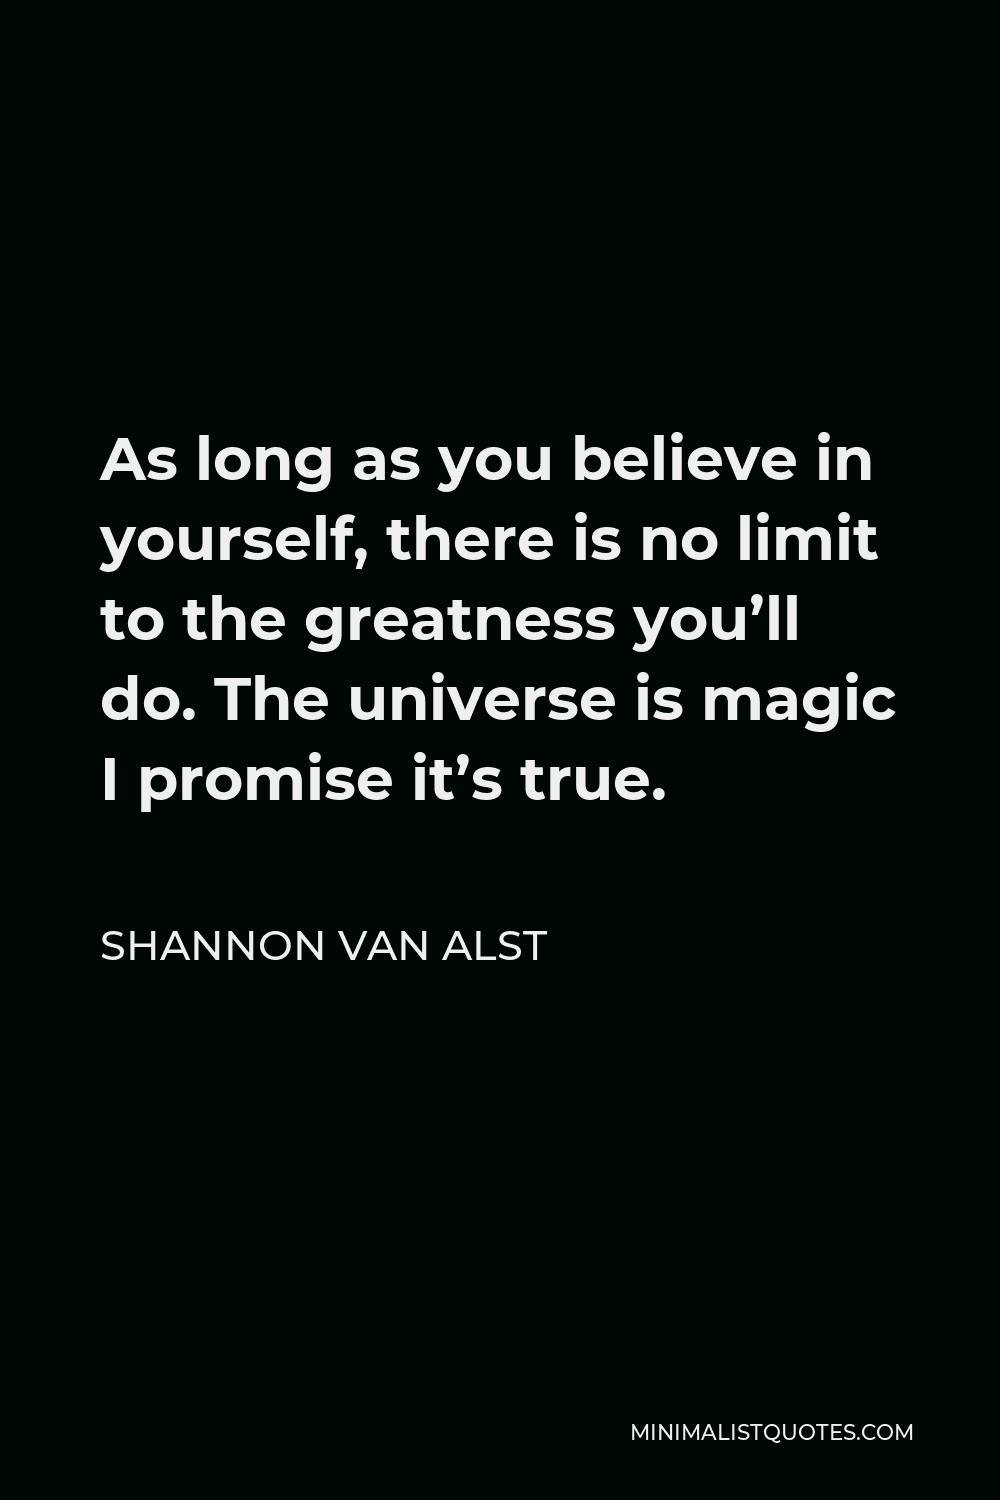 Shannon Van Alst Quote - As long as you believe in yourself, there is no limit to the greatness you’ll do. The universe is magic I promise it’s true.